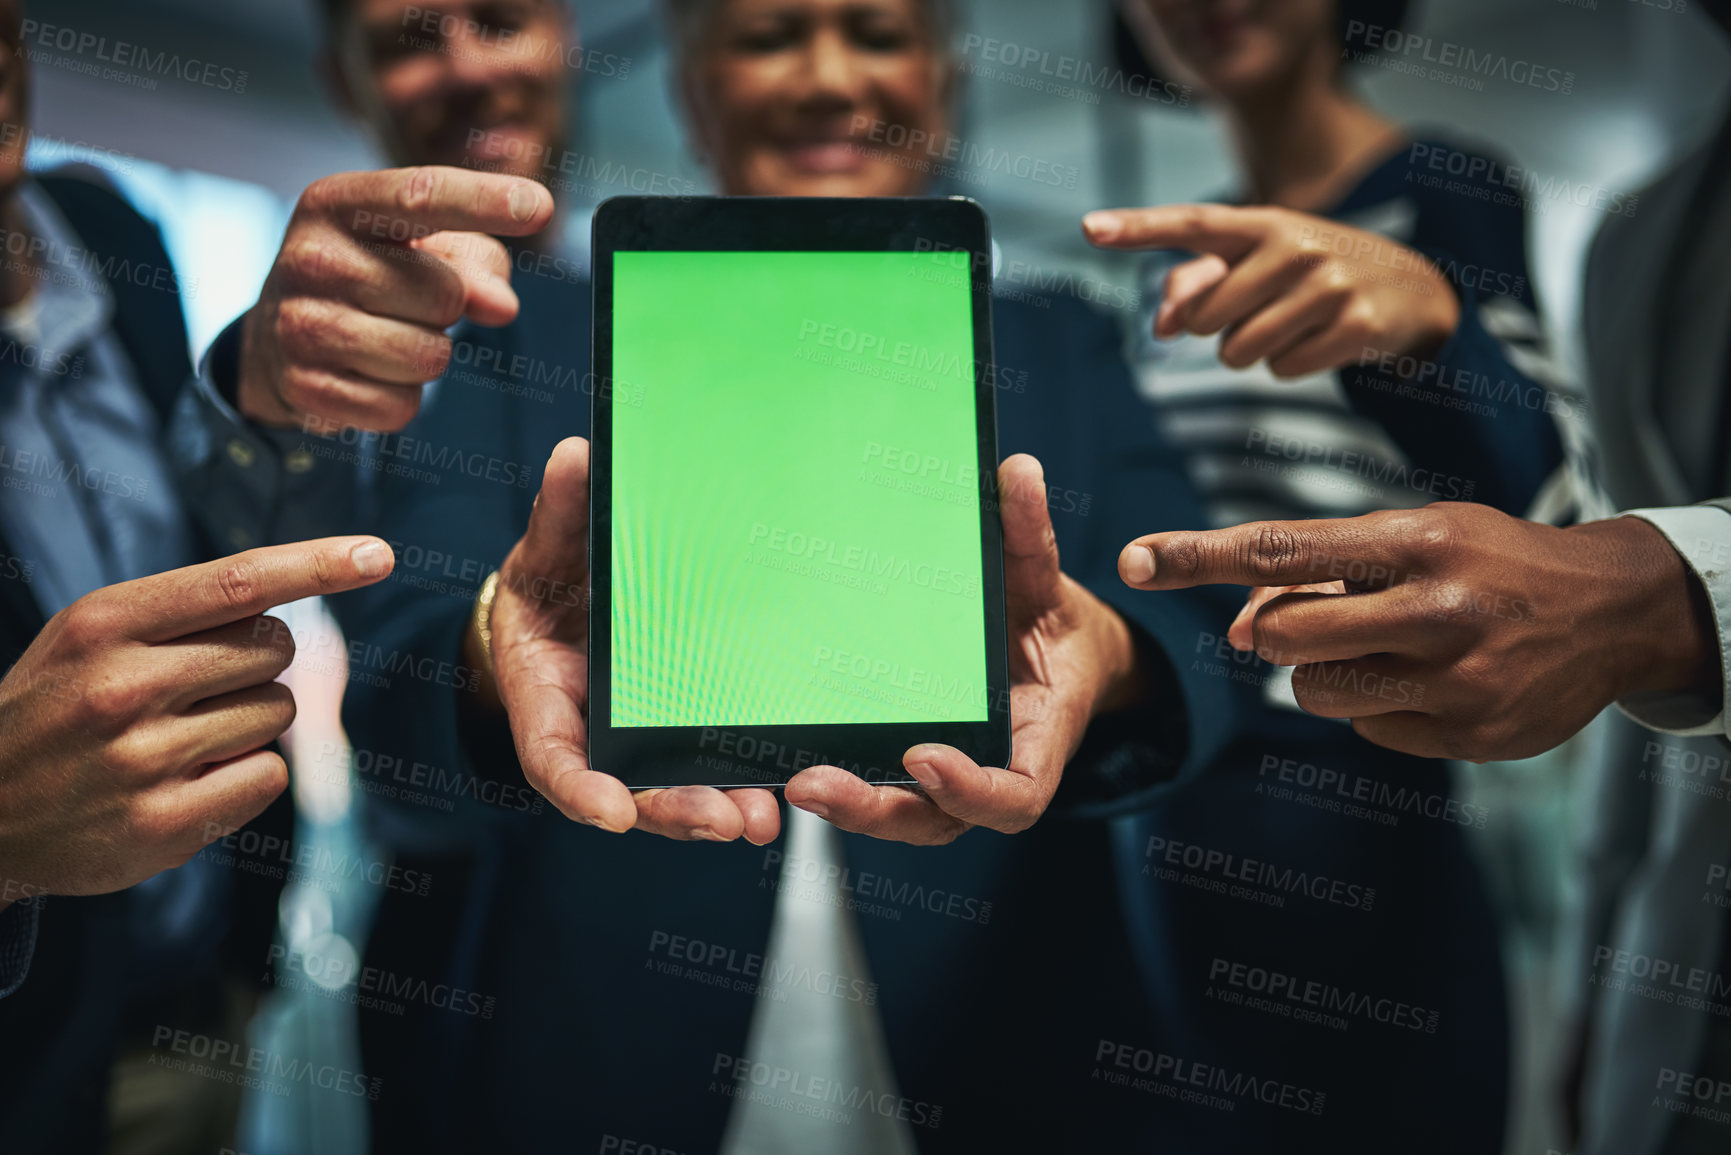 Buy stock photo Shot of a group of businesspeople pointing to a digital tablet with a chroma key screen